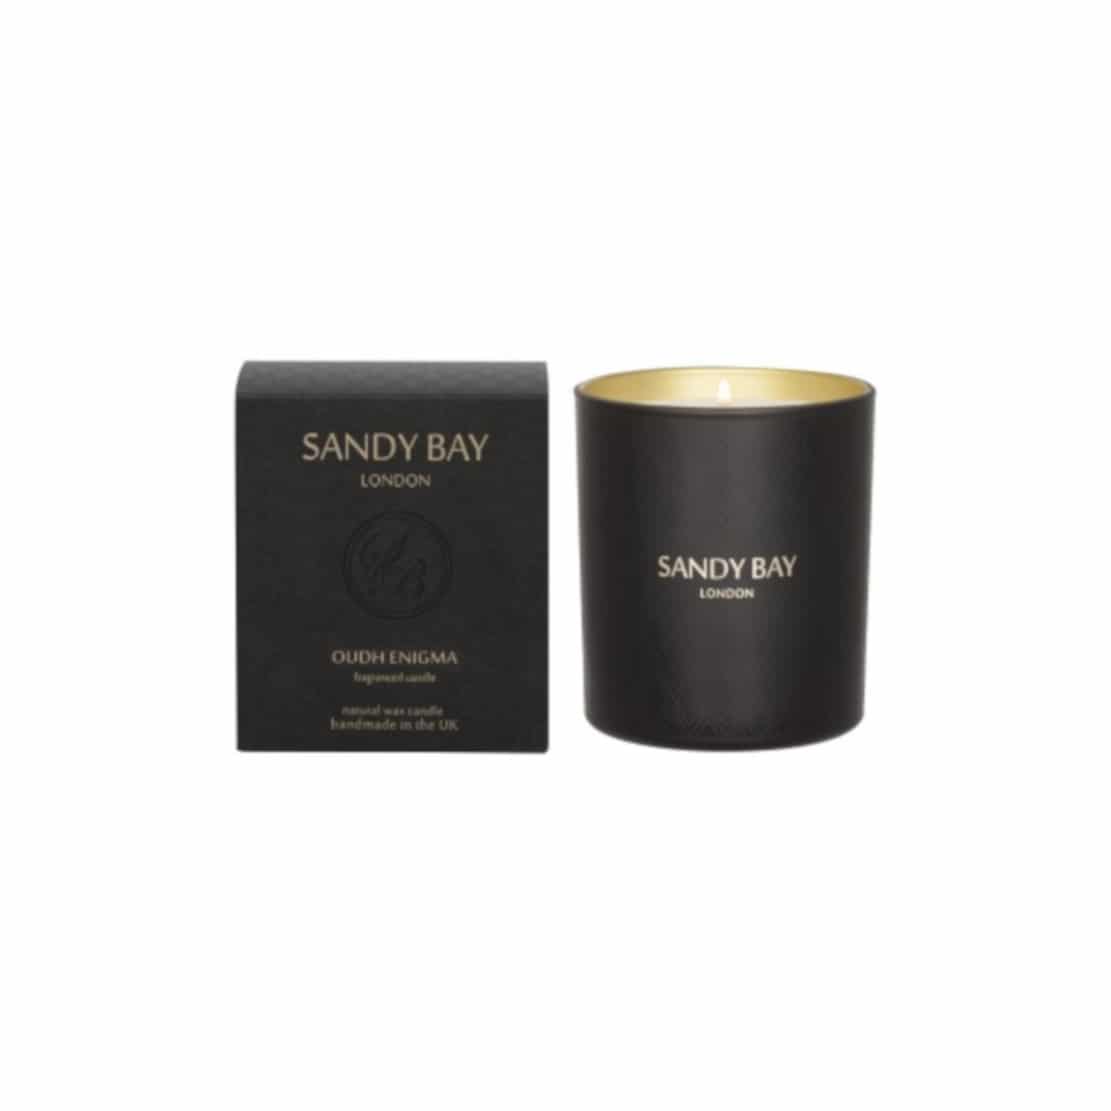 Sandy Bay Oudh Enigma 30cl Candle